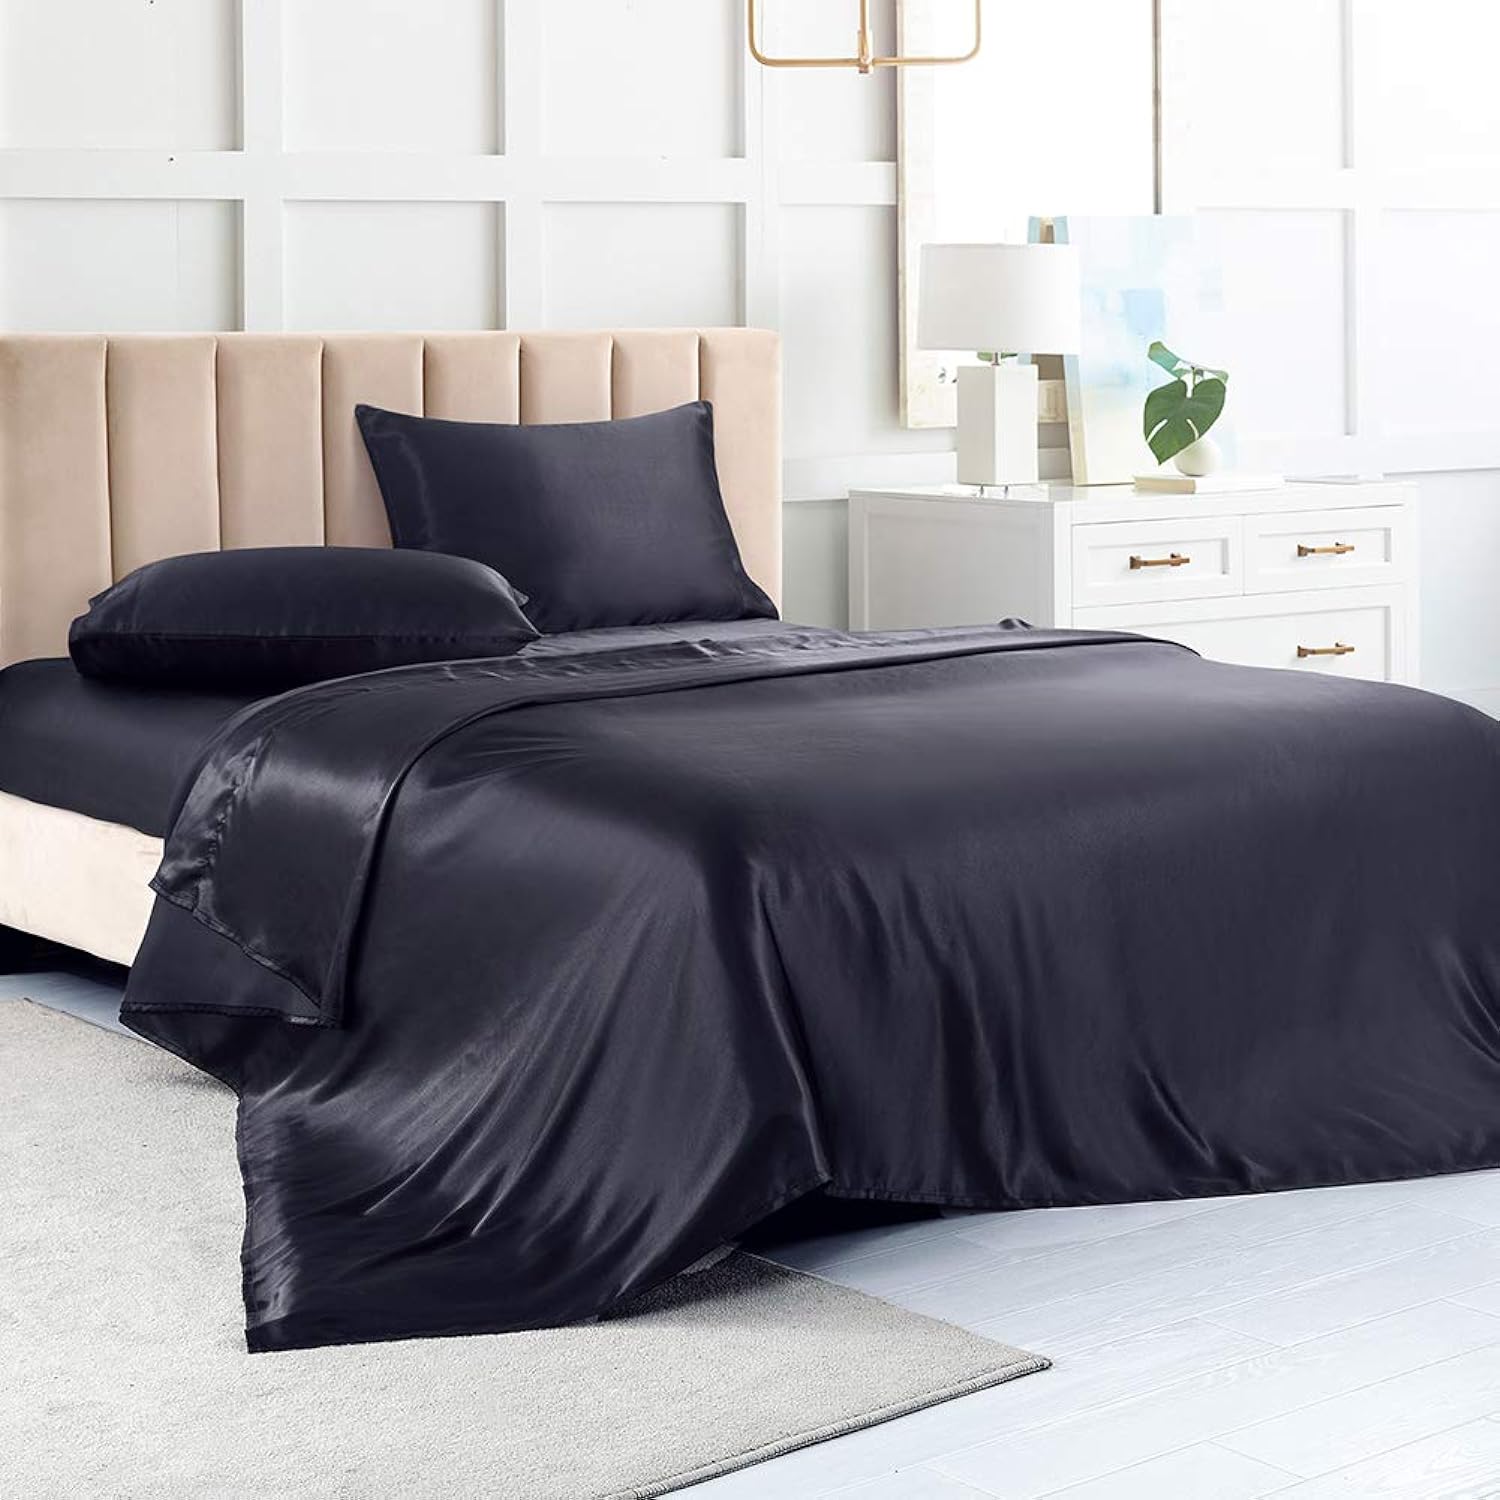 Great Choice Products Satin Bed Sheet, Queen Size Sheet-Black Sheets For Queen Mattress-4 Pcs Silky Bed Sheet Set With 1 Deep Pocket Fitted Shee…